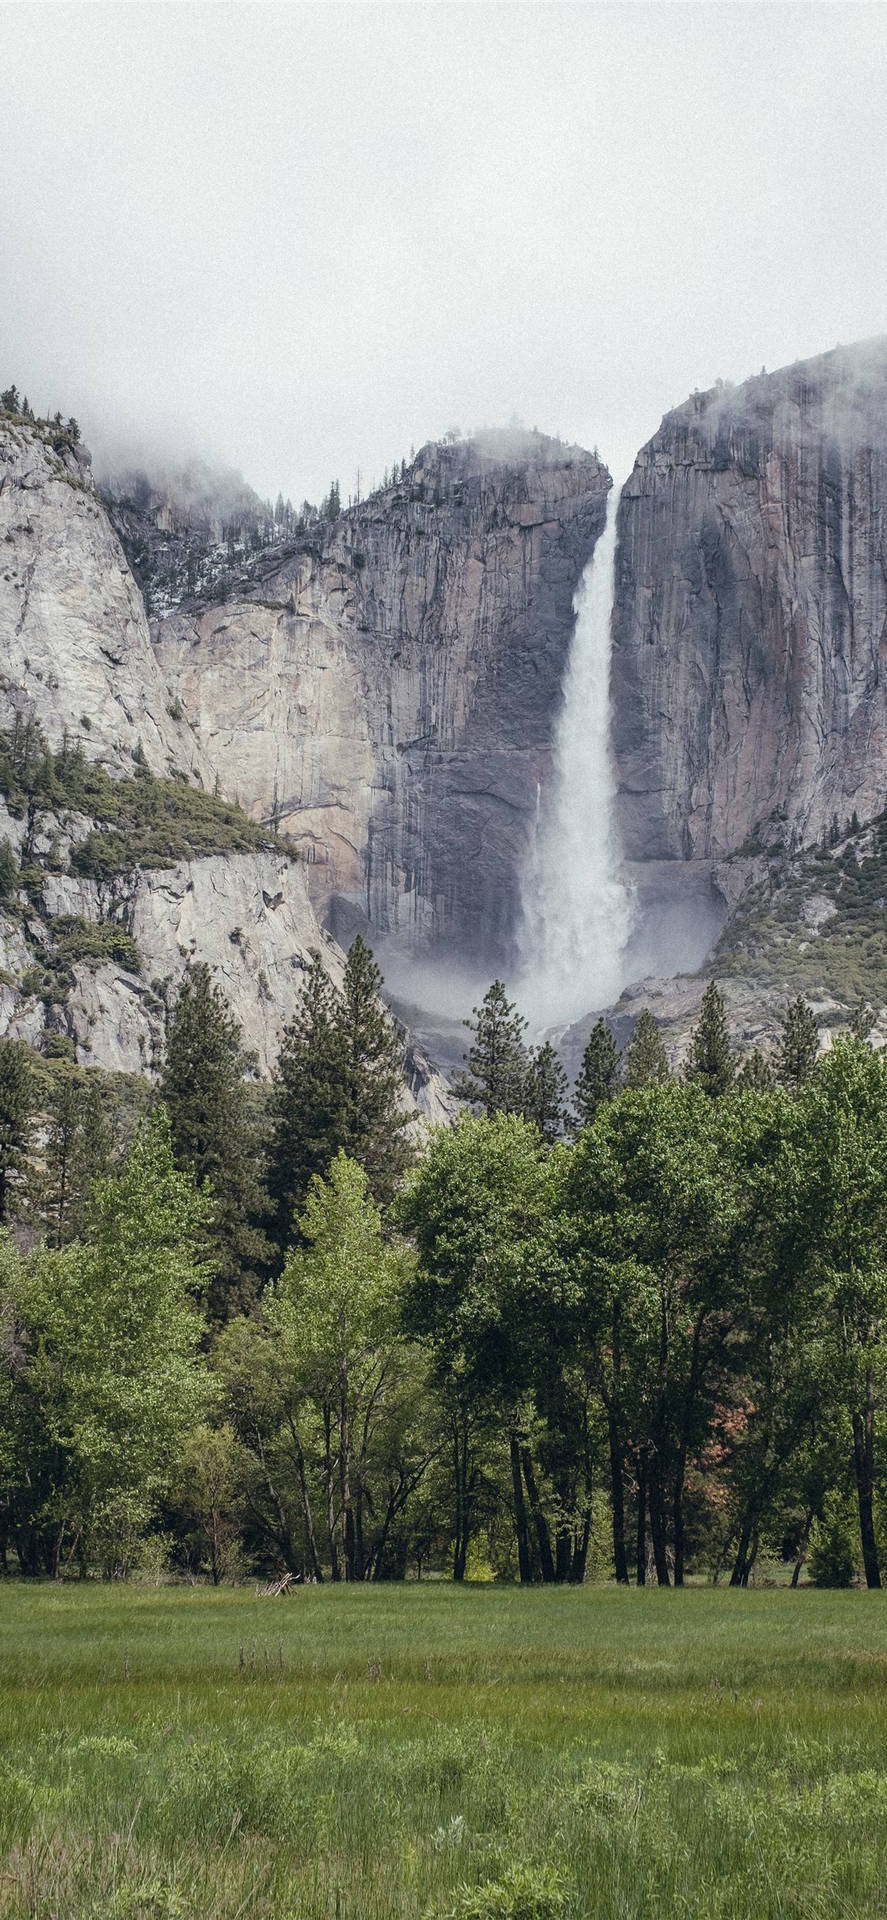 Relax and enjoy the amazing views of Yosemite National Park with your iPhone. Wallpaper